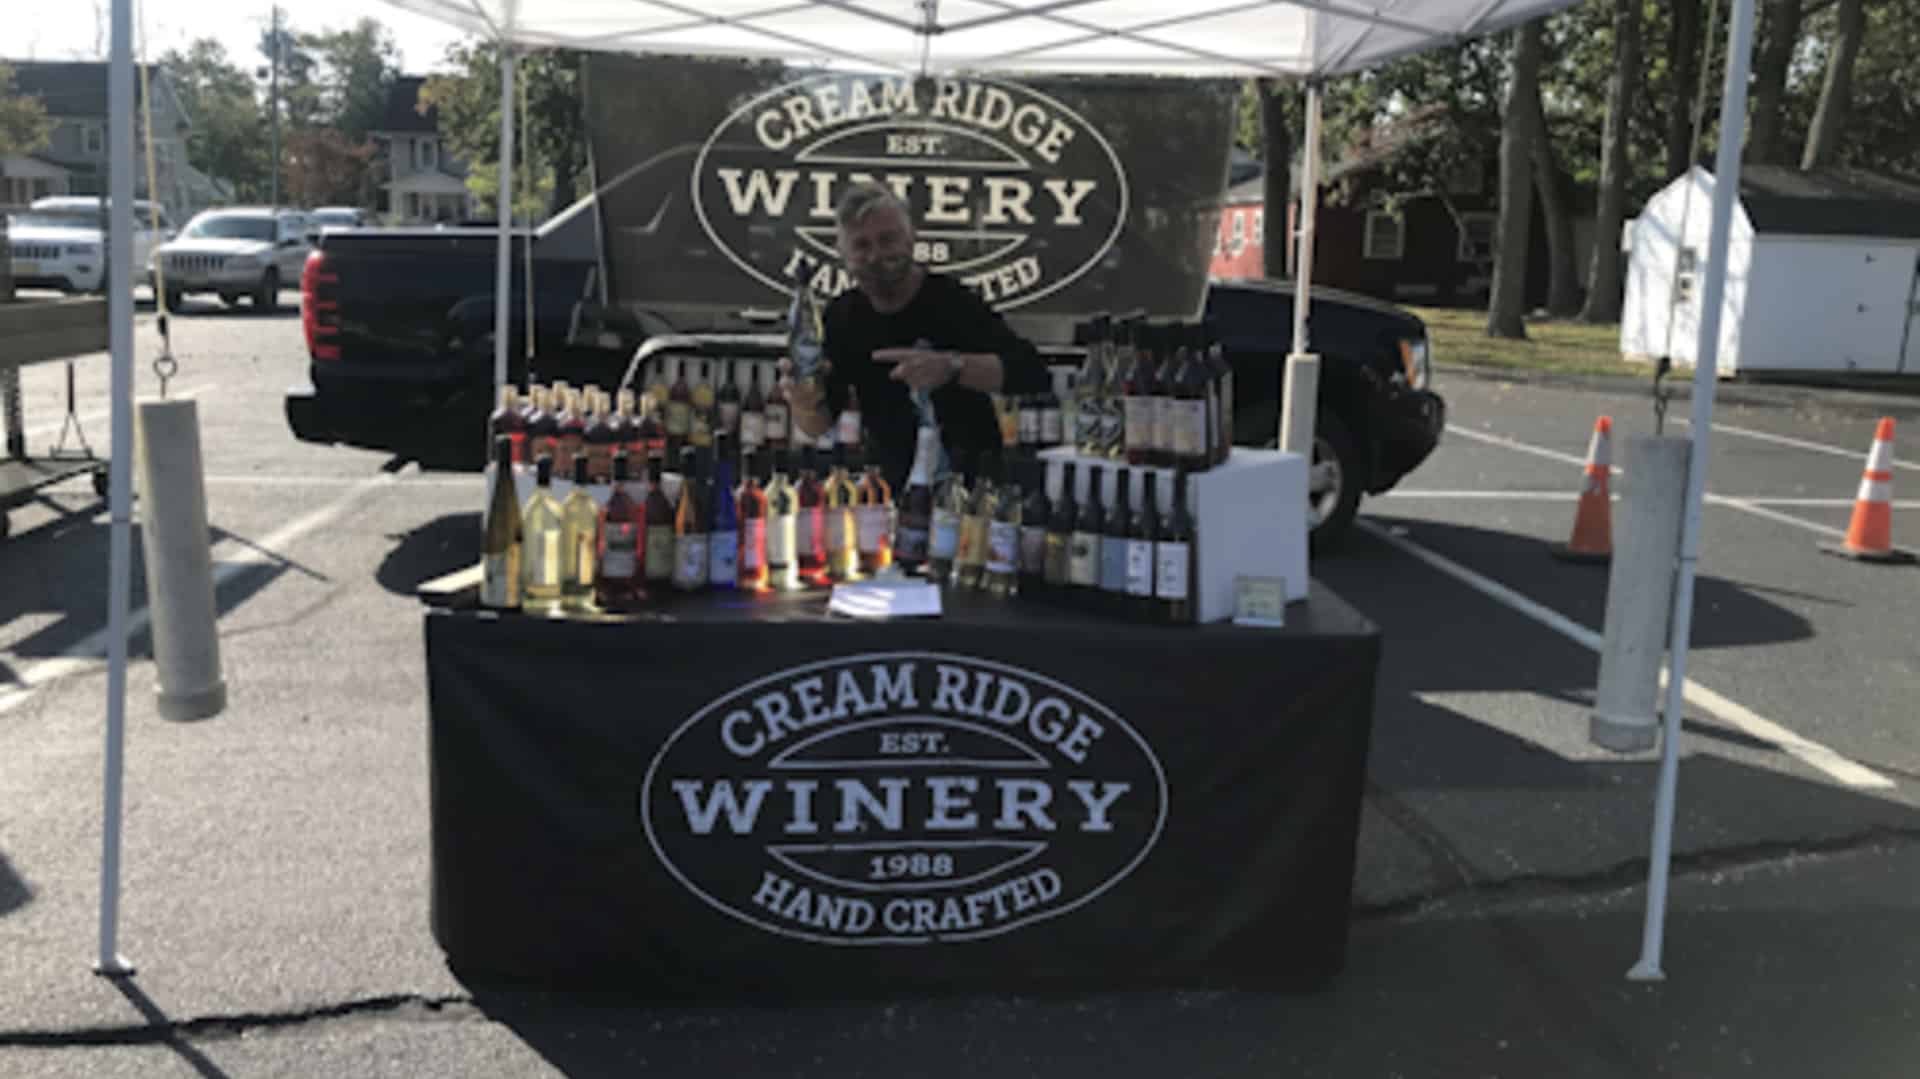 a man sells wine at an outdoor table for Cream Ridge Winery